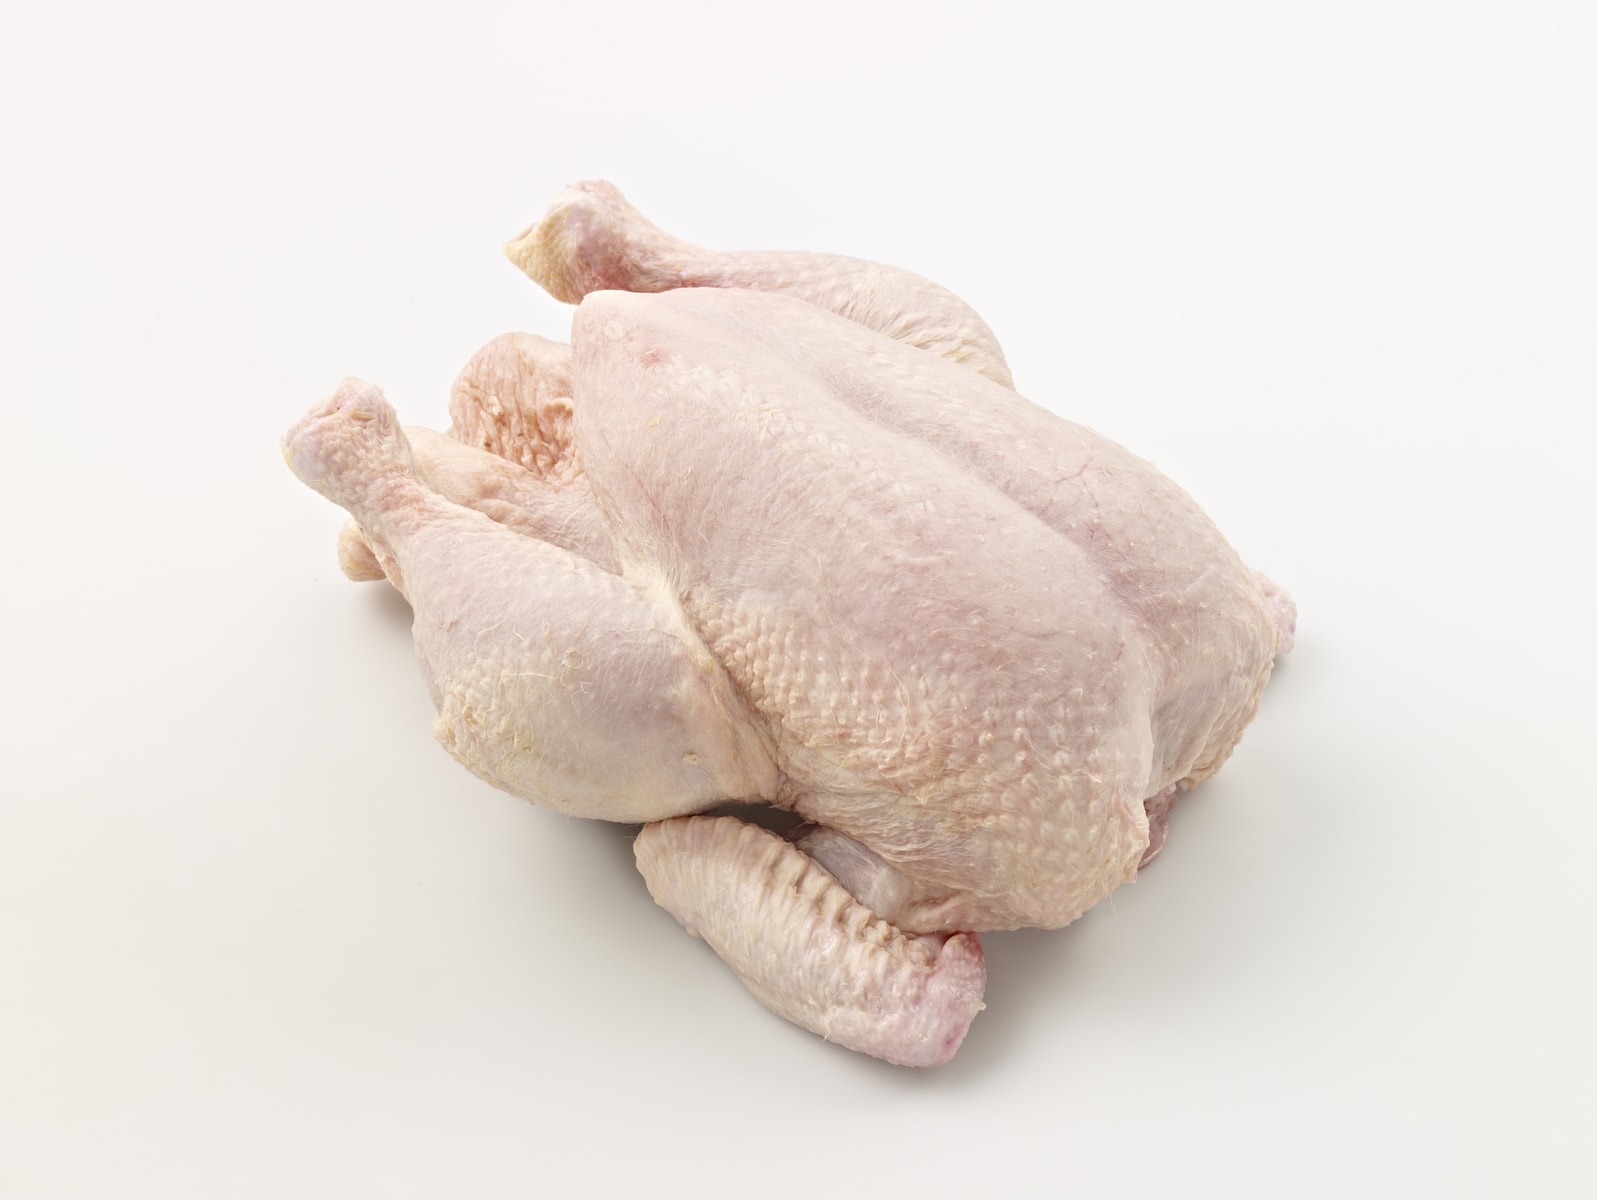 How To Store Uncooked Chicken